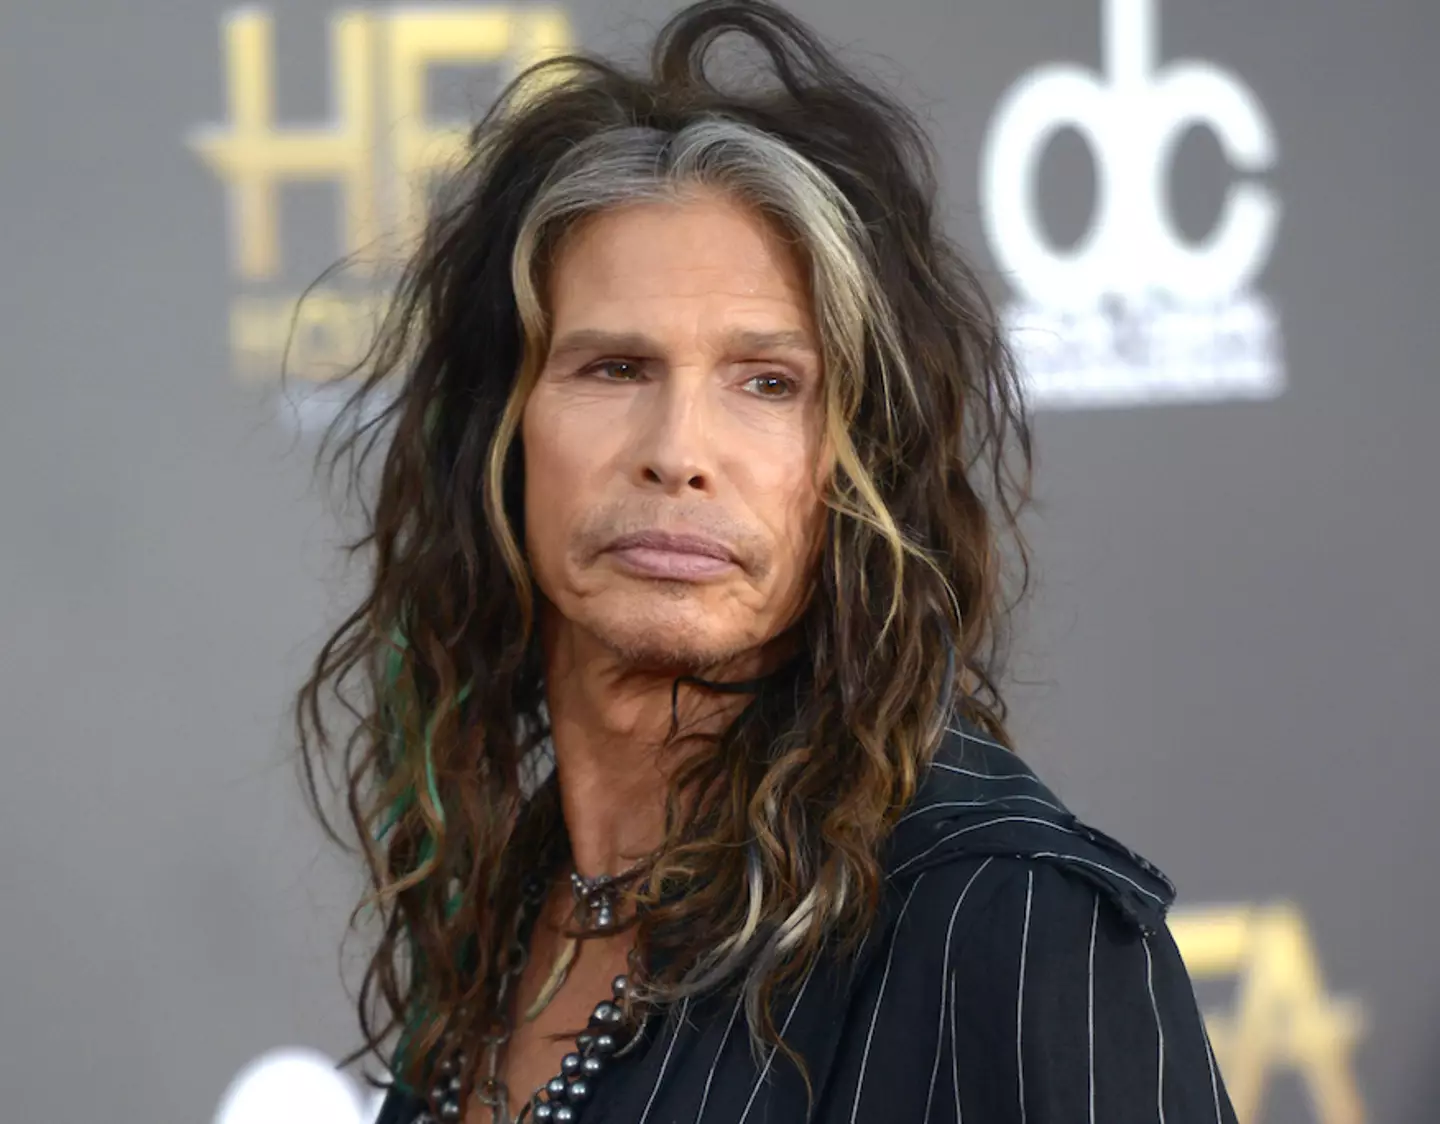 Steven Tyler has been officially named in the lawsuit.